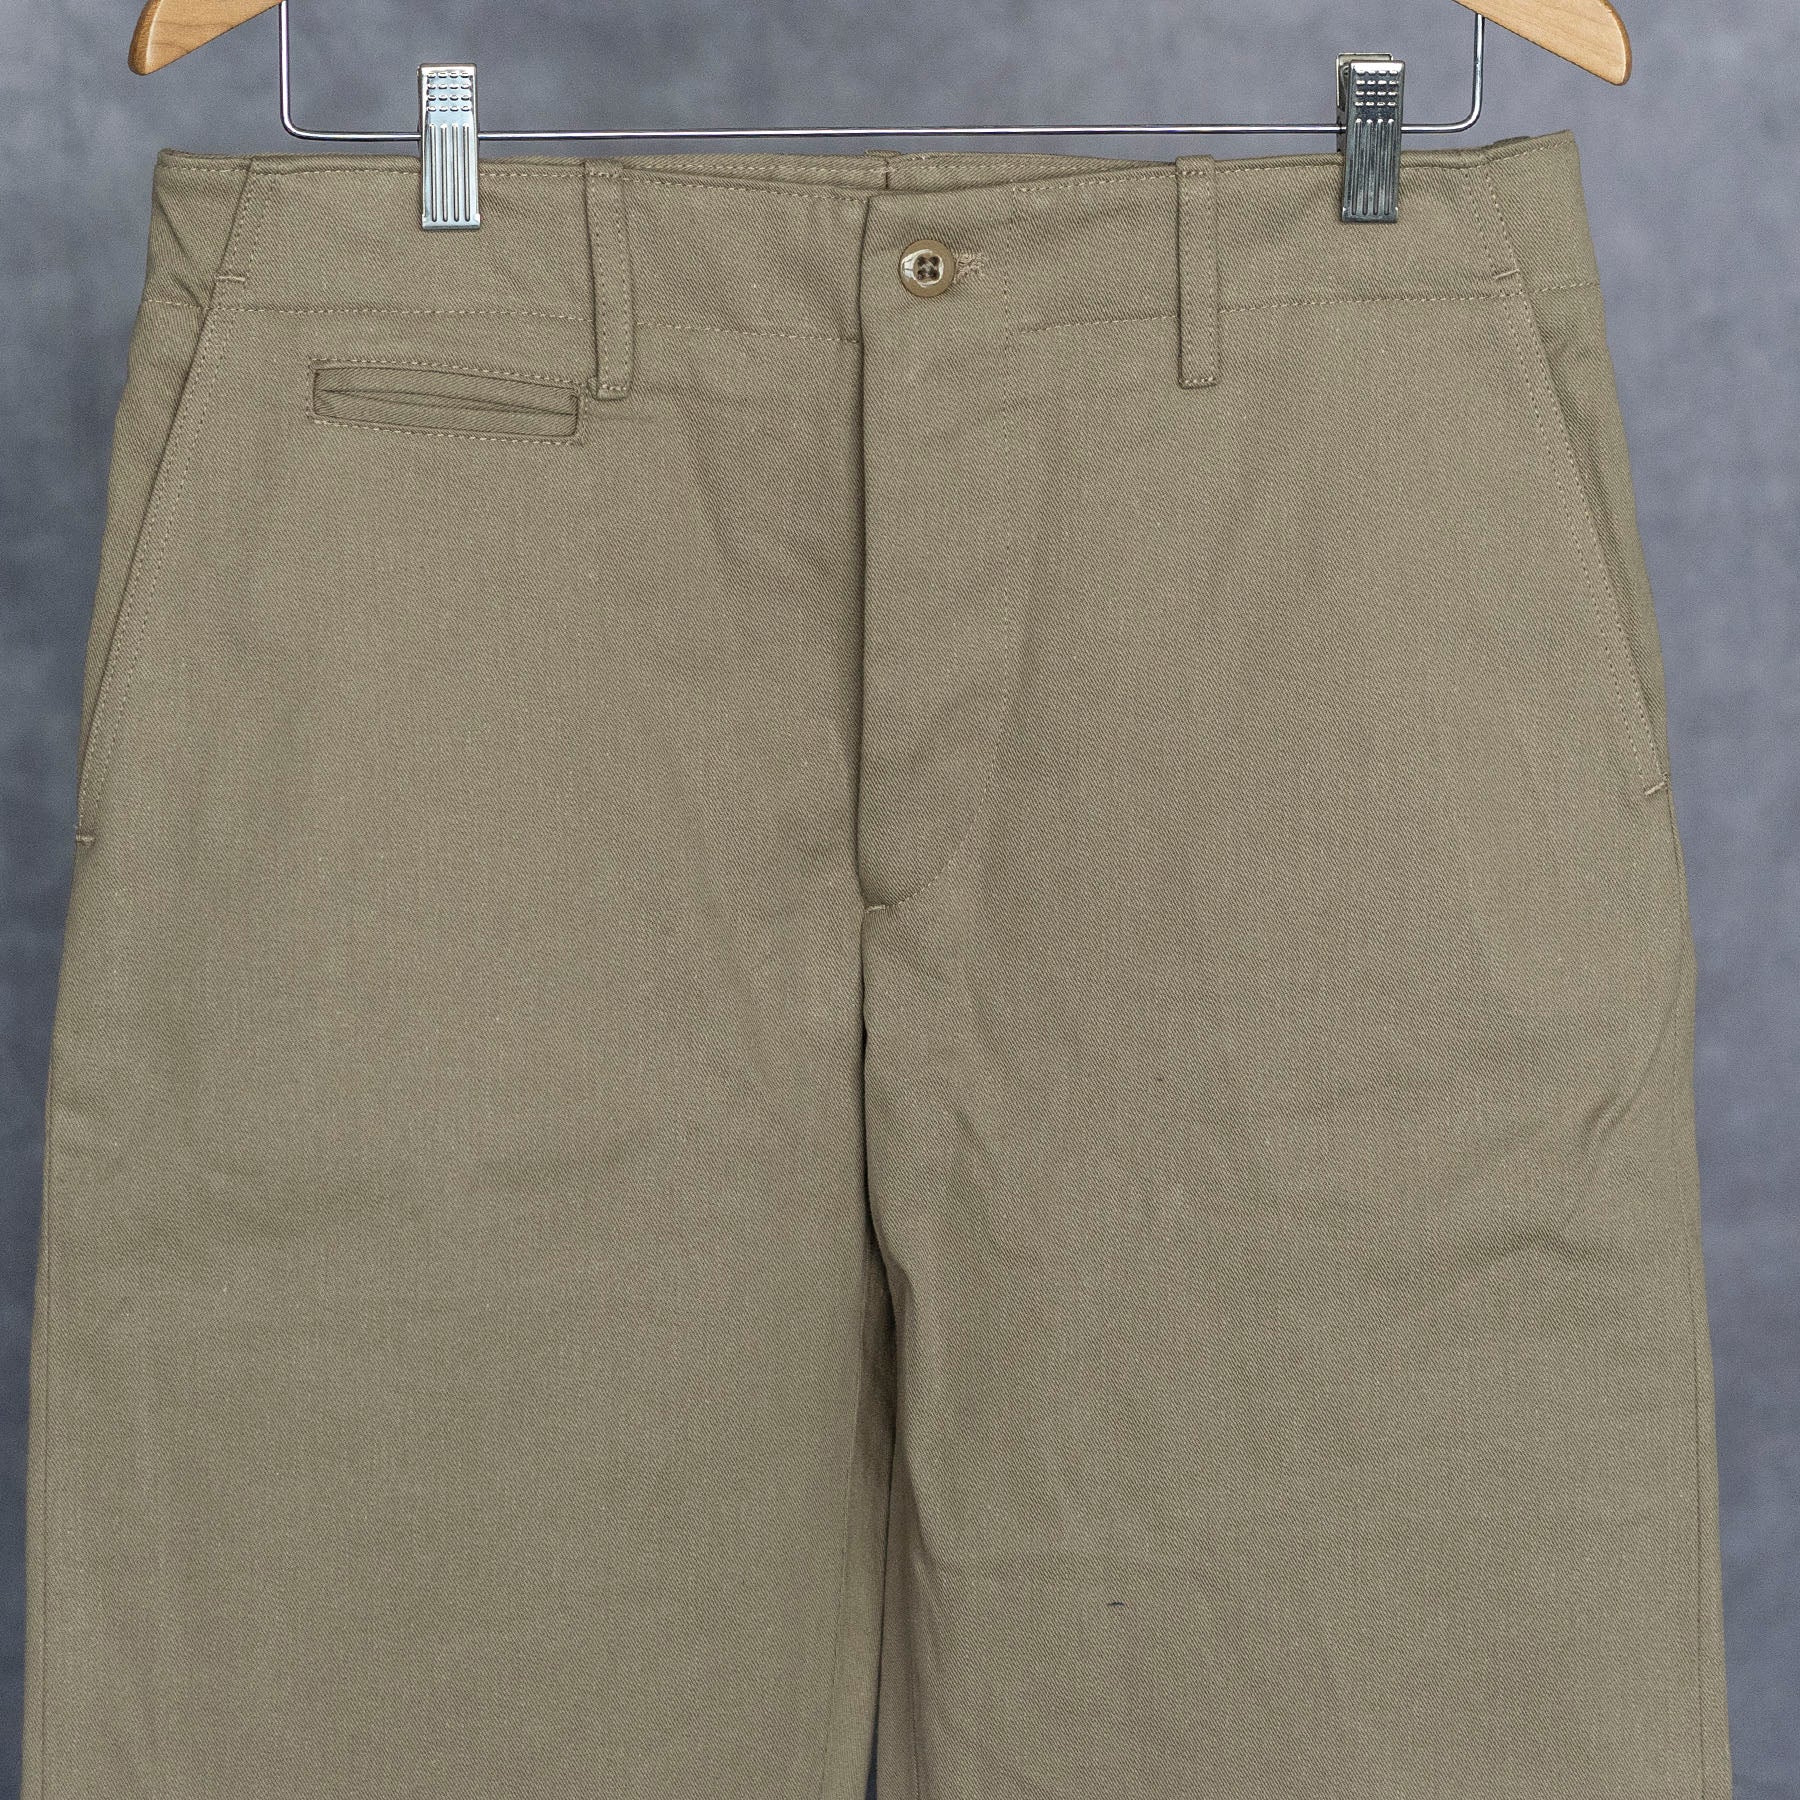 Sample Sale: Hertling Loose Fit in Khaki 10oz Selvedge Twill, Size 30 x 33 inseam